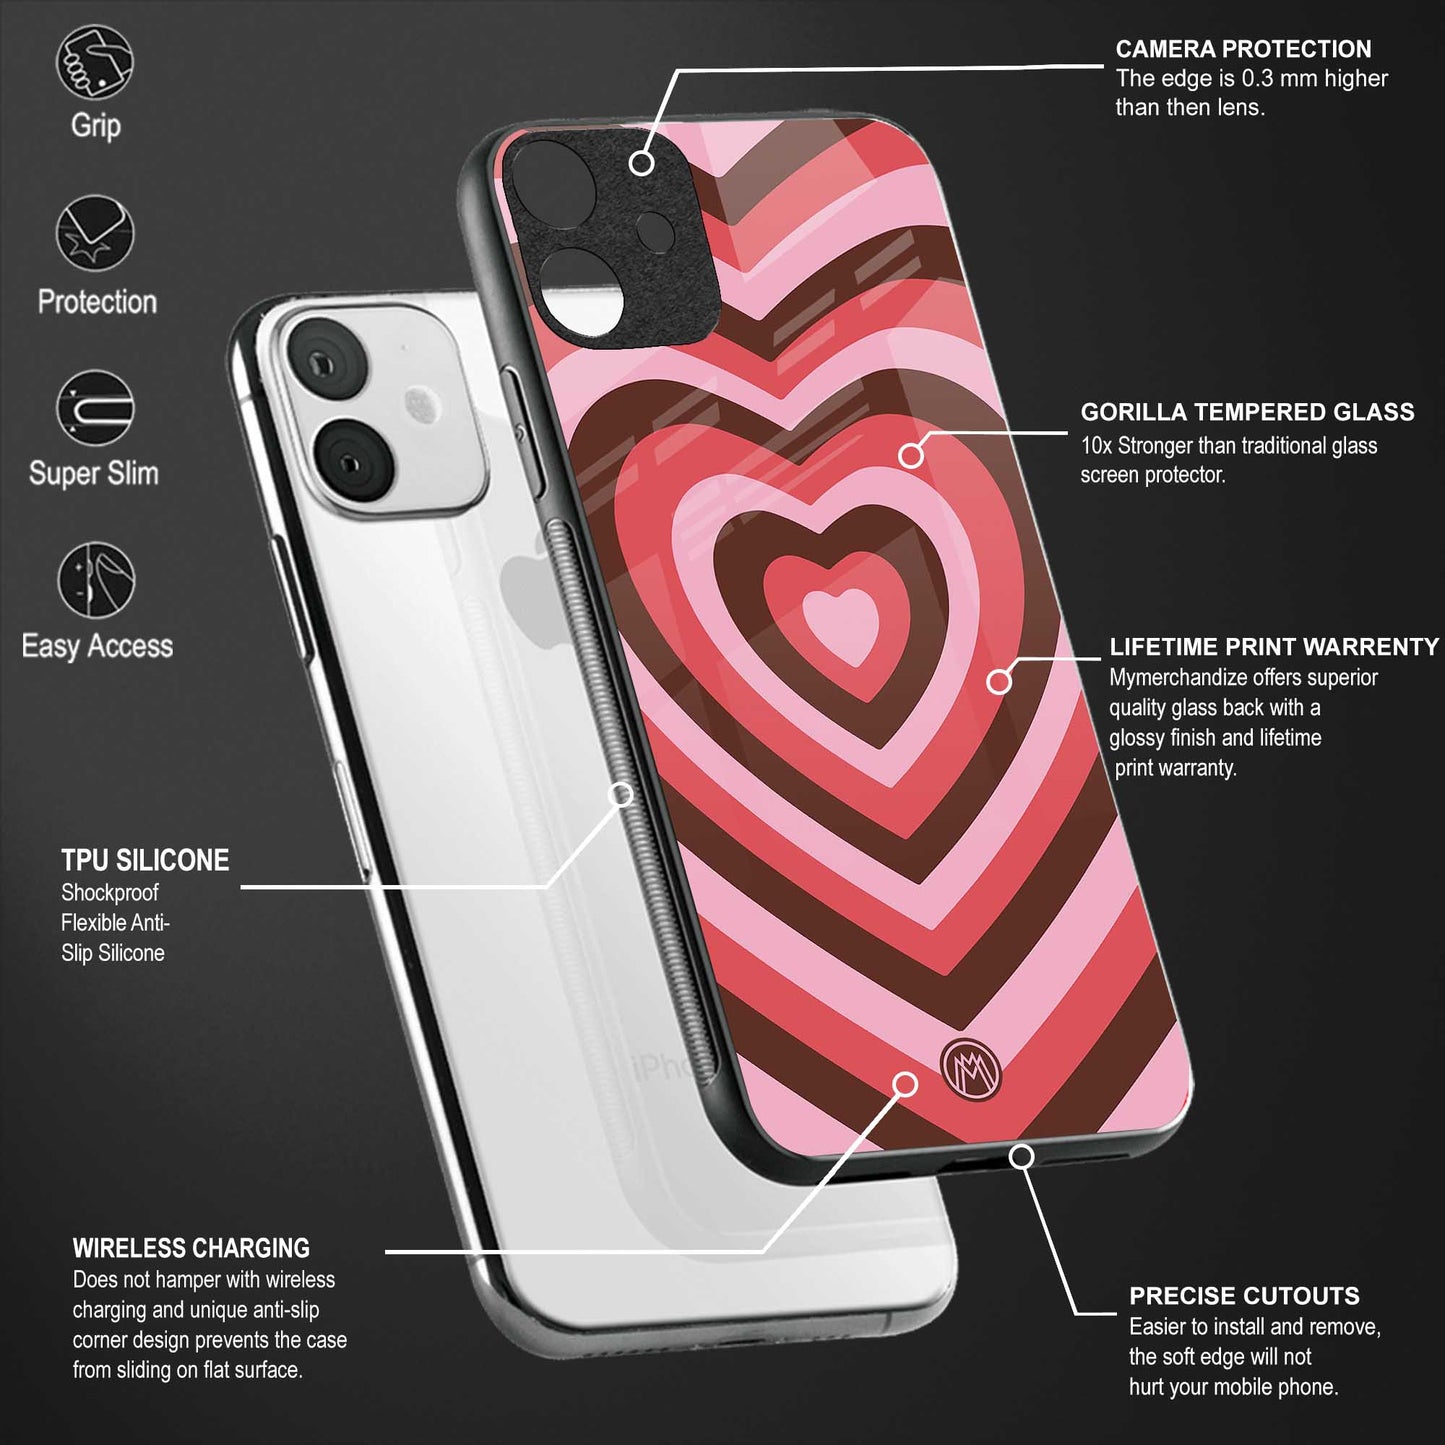 y2k red pink brown hearts aesthetic back phone cover | glass case for vivo y22